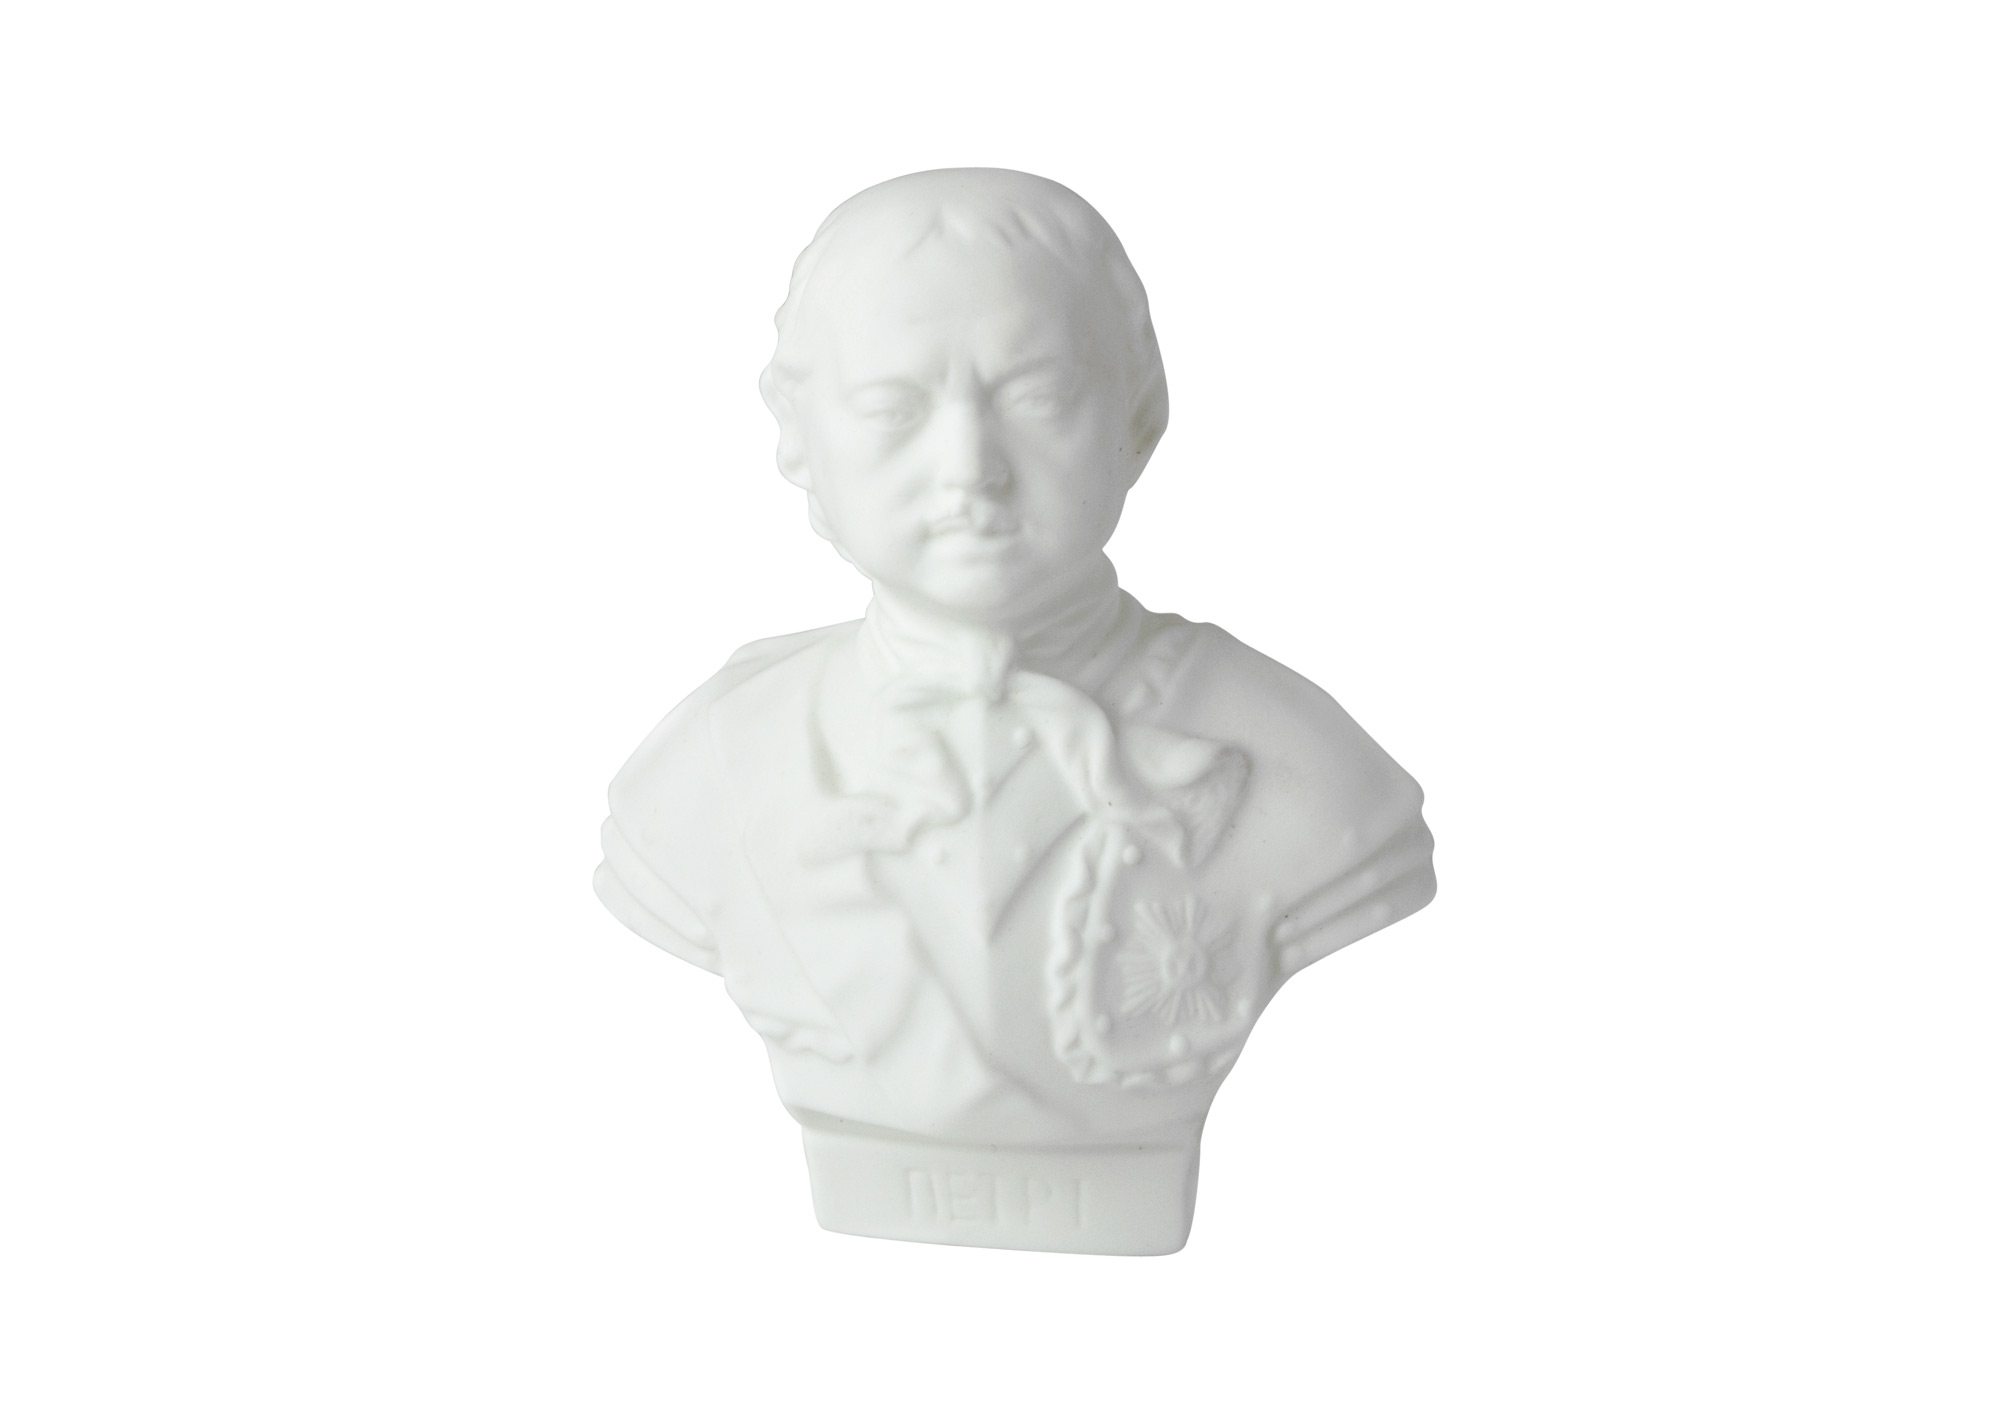 Buy Bust of Peter The Great at GoldenCockerel.com